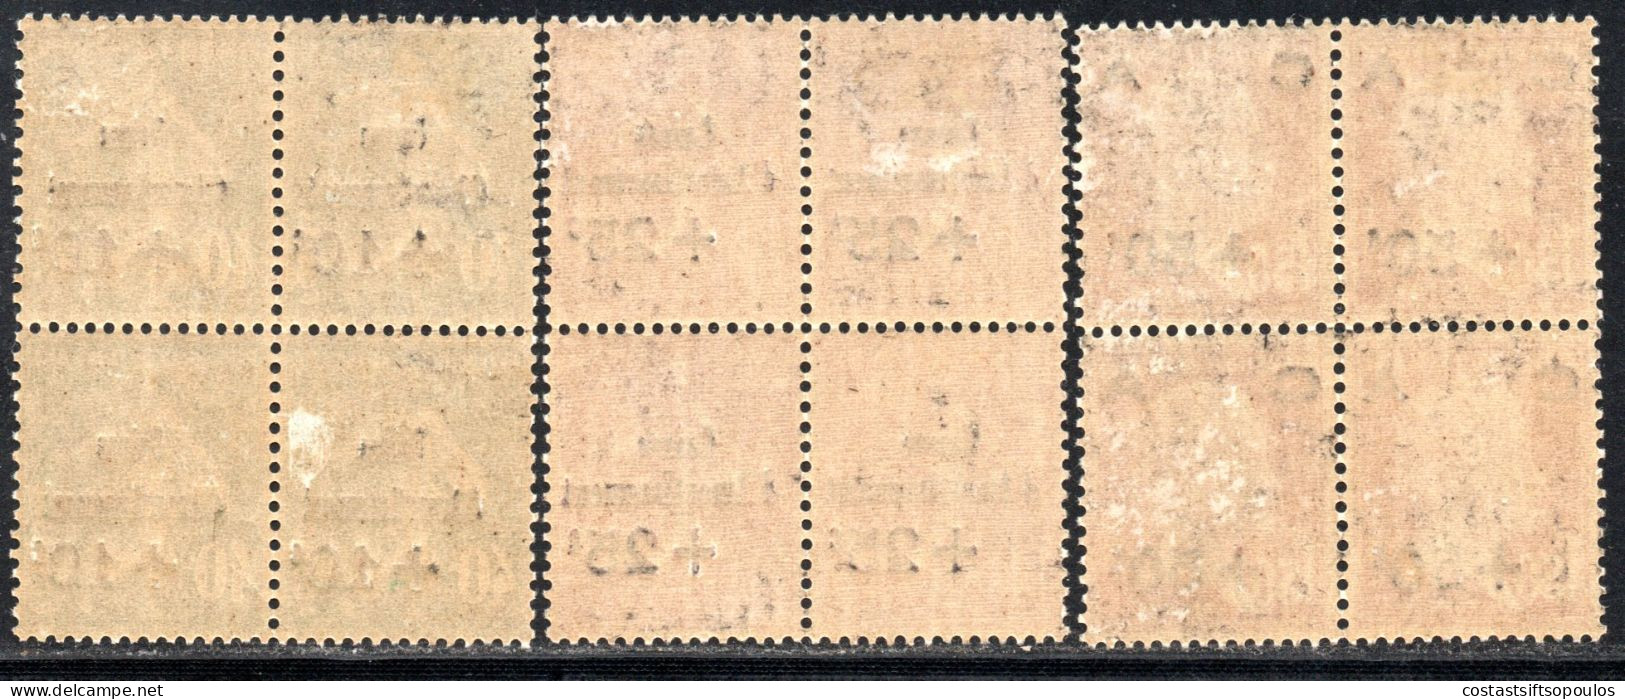 2614.FRANCE 1929 SINKING FUNDS #253-255 MNH BLOCKS OF 4,2-3 INVISIBLE TRACES OF HINGE.SEE VERY LIGHT GUM BLEMISHES - 1927-31 Sinking Fund